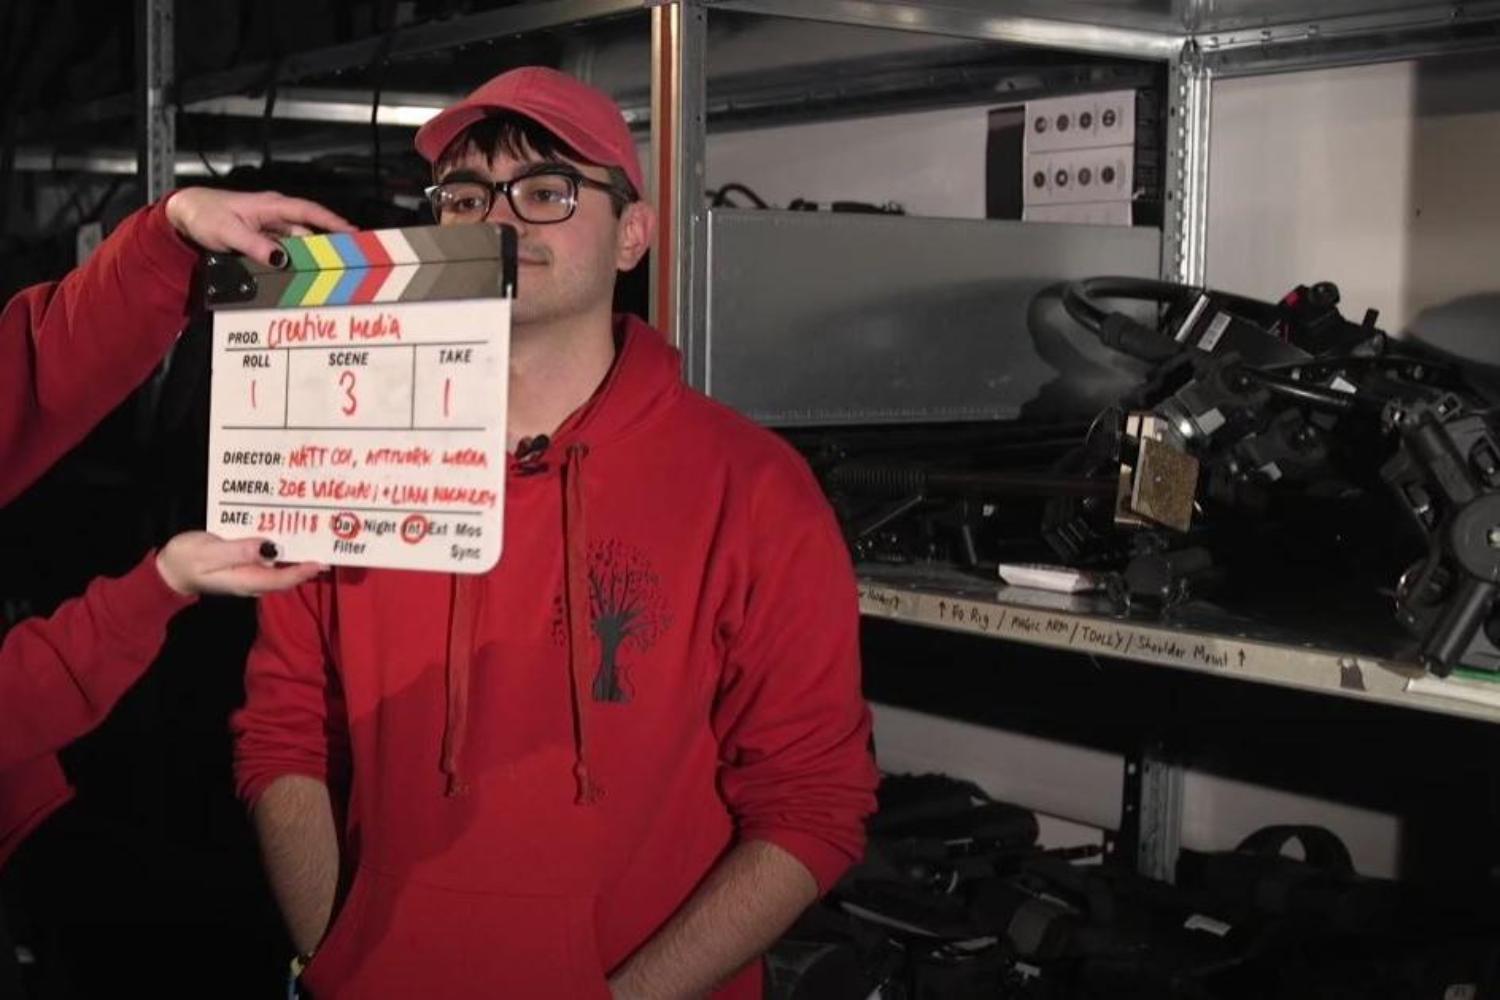  A student holds a clapperboard in front of another student being interviewed